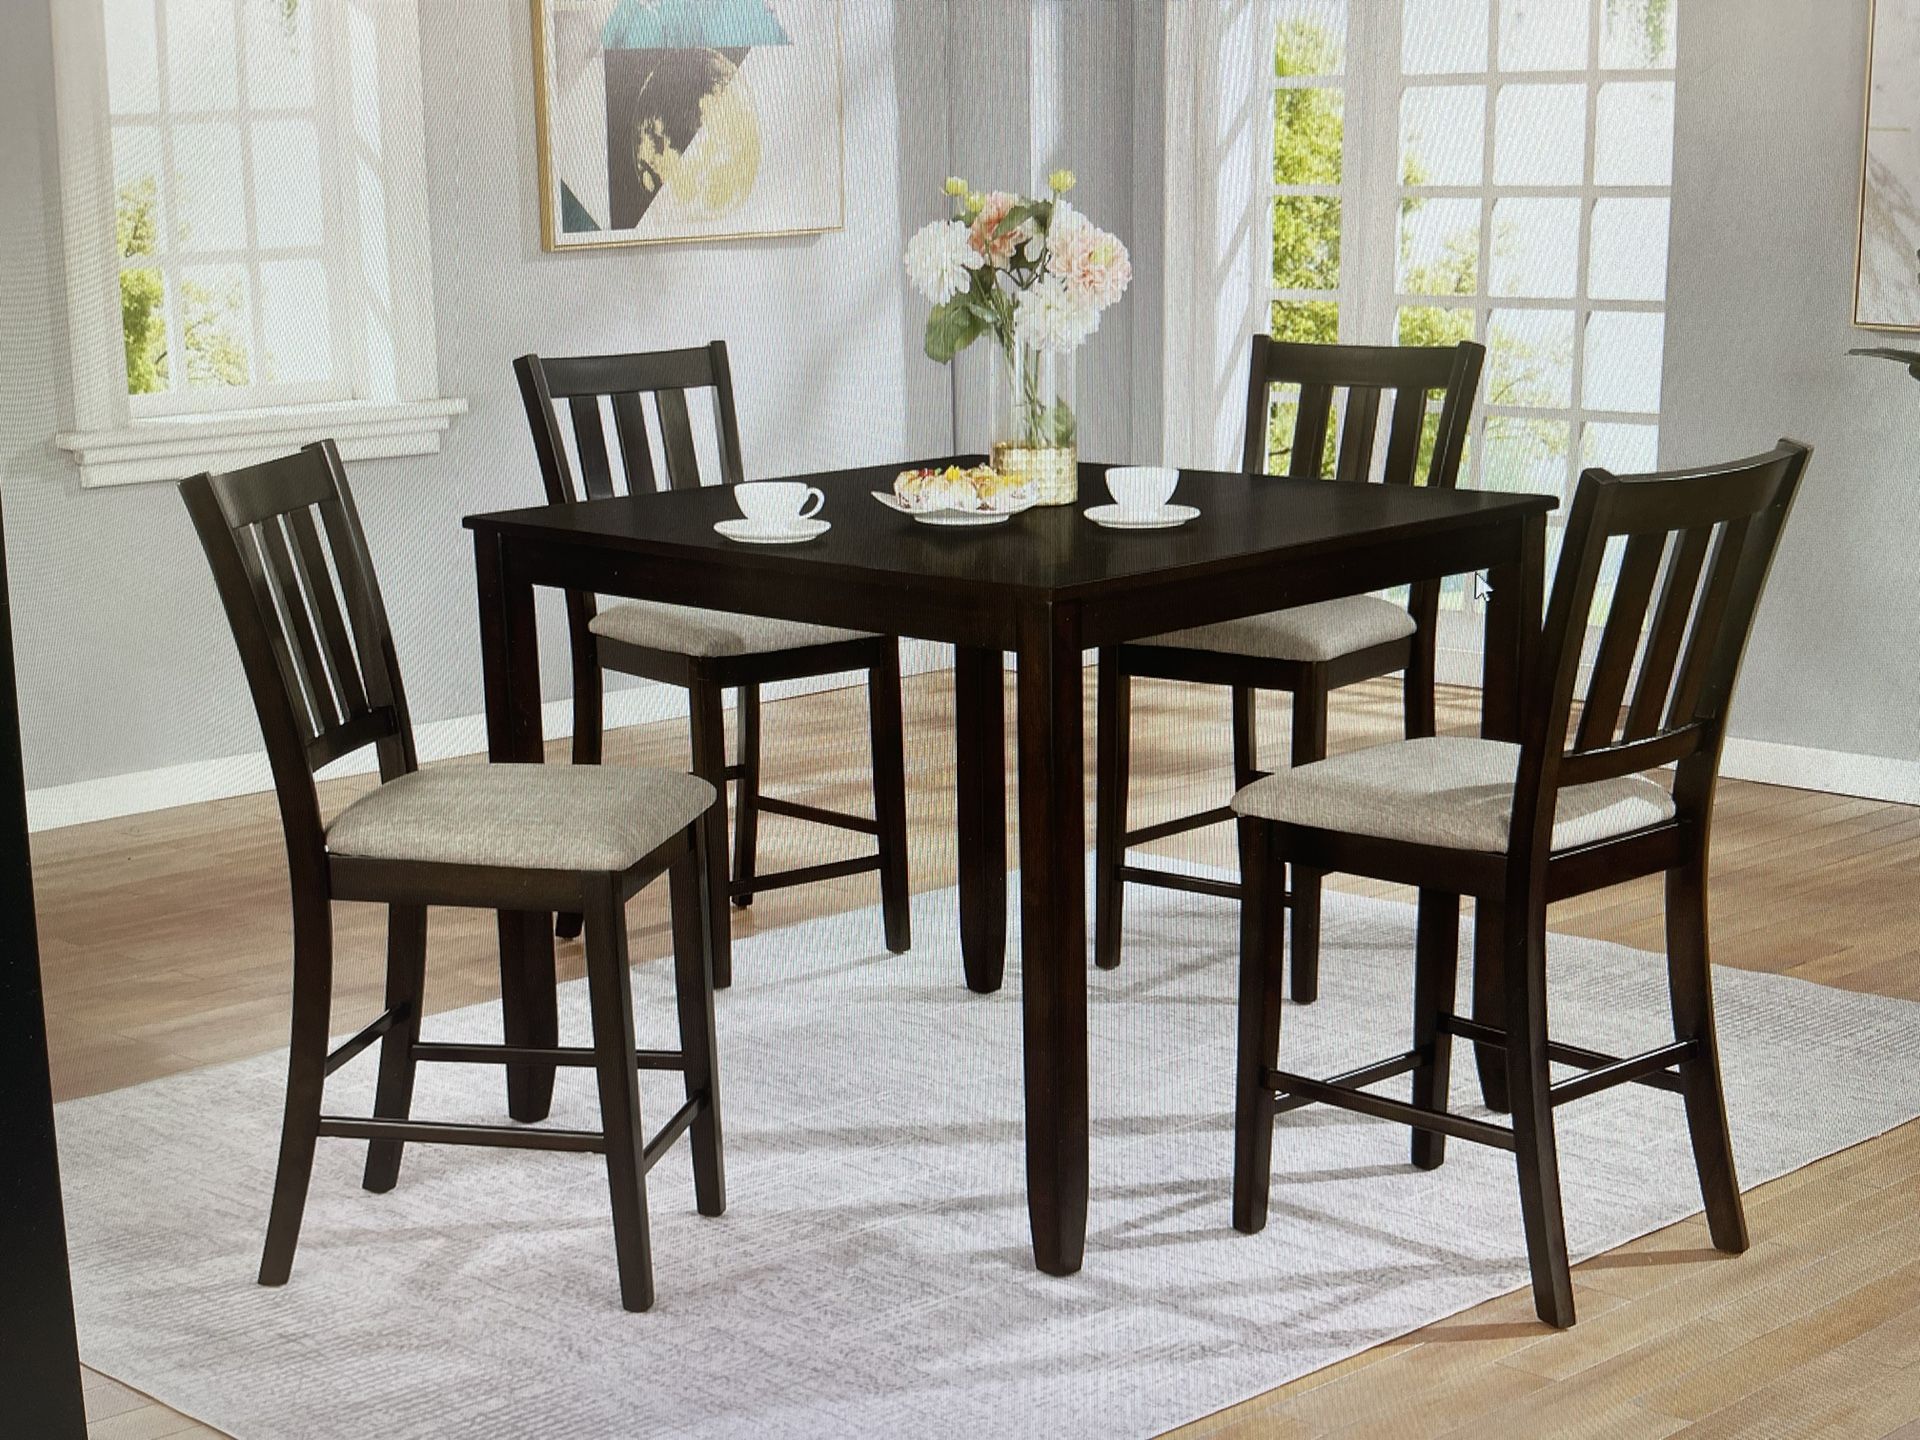 New Table With 4 Chairs For $289